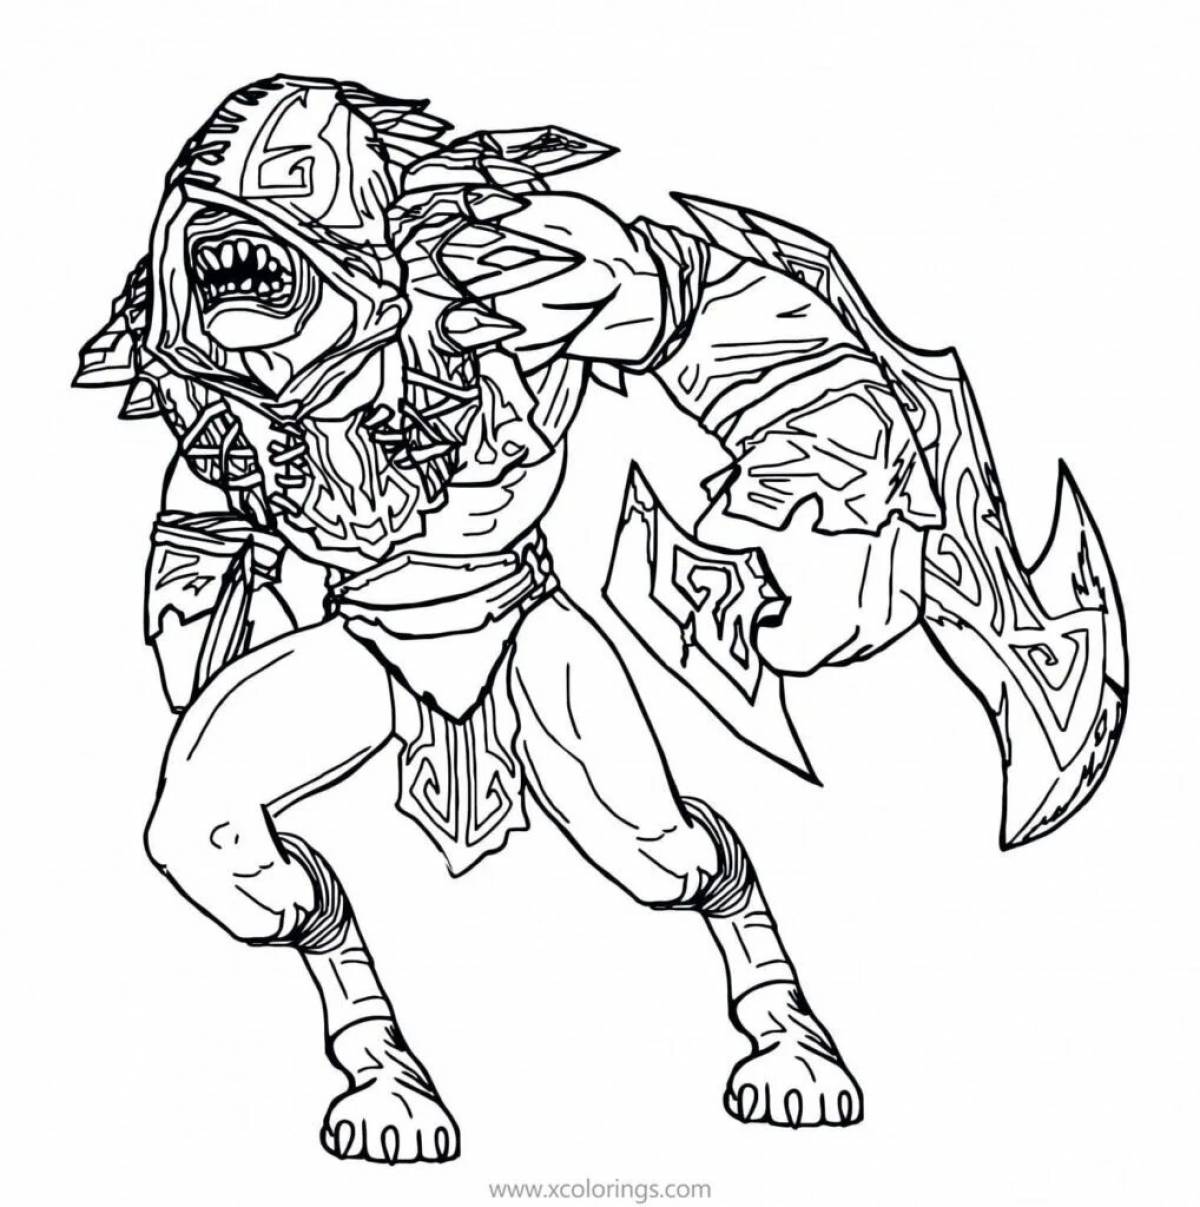 Awesome dota 2 pudge coloring page